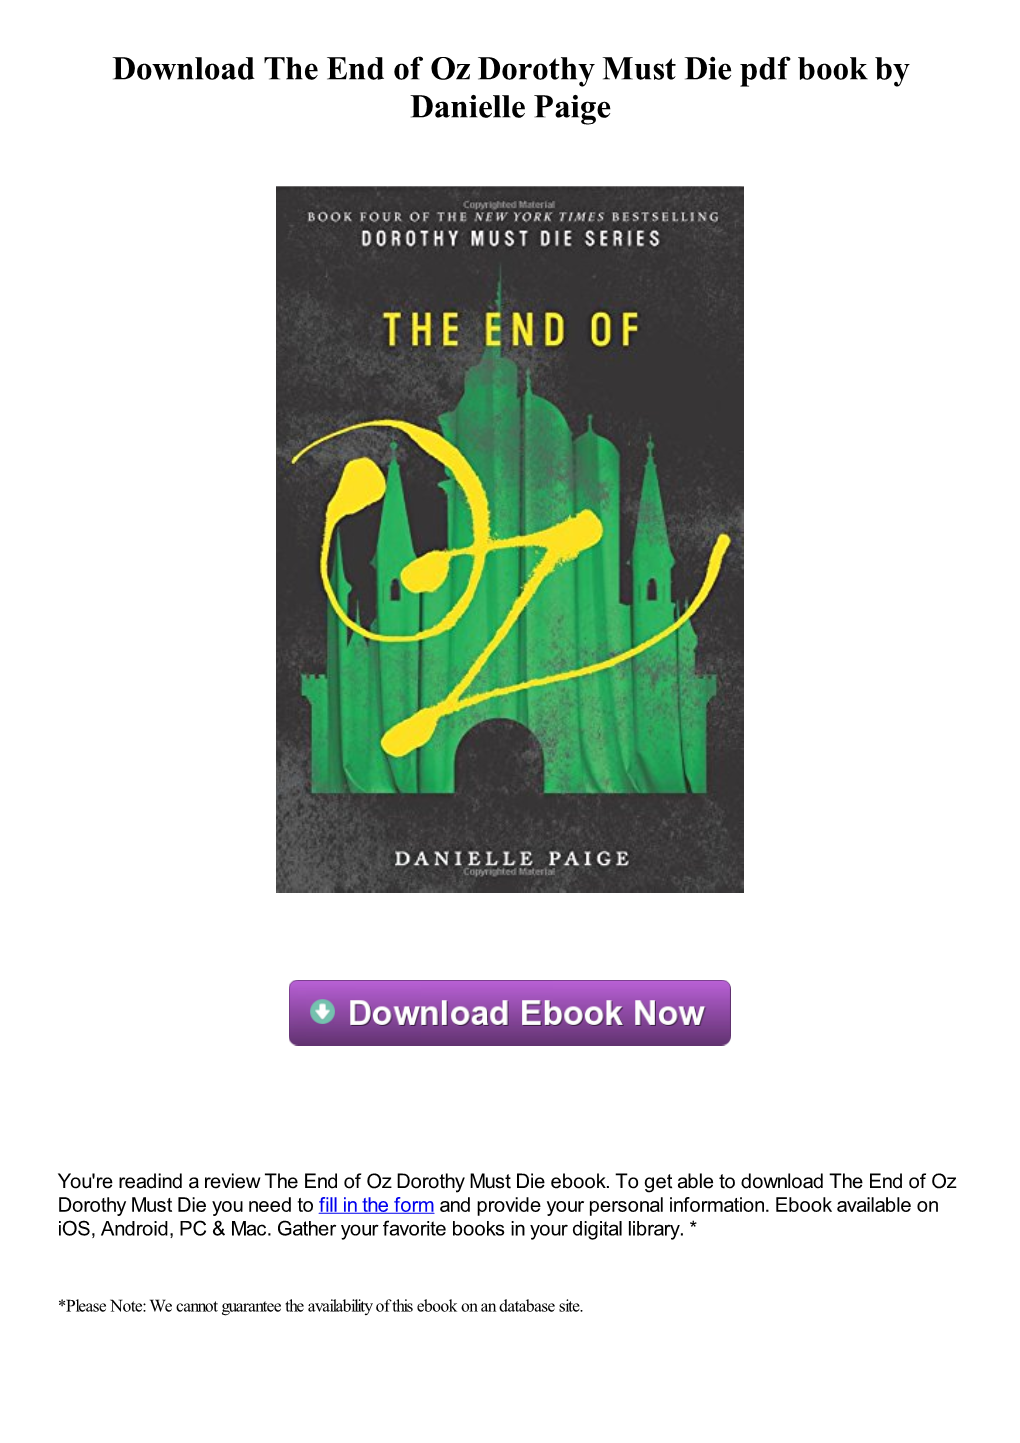 Download the End of Oz Dorothy Must Die Pdf Book by Danielle Paige